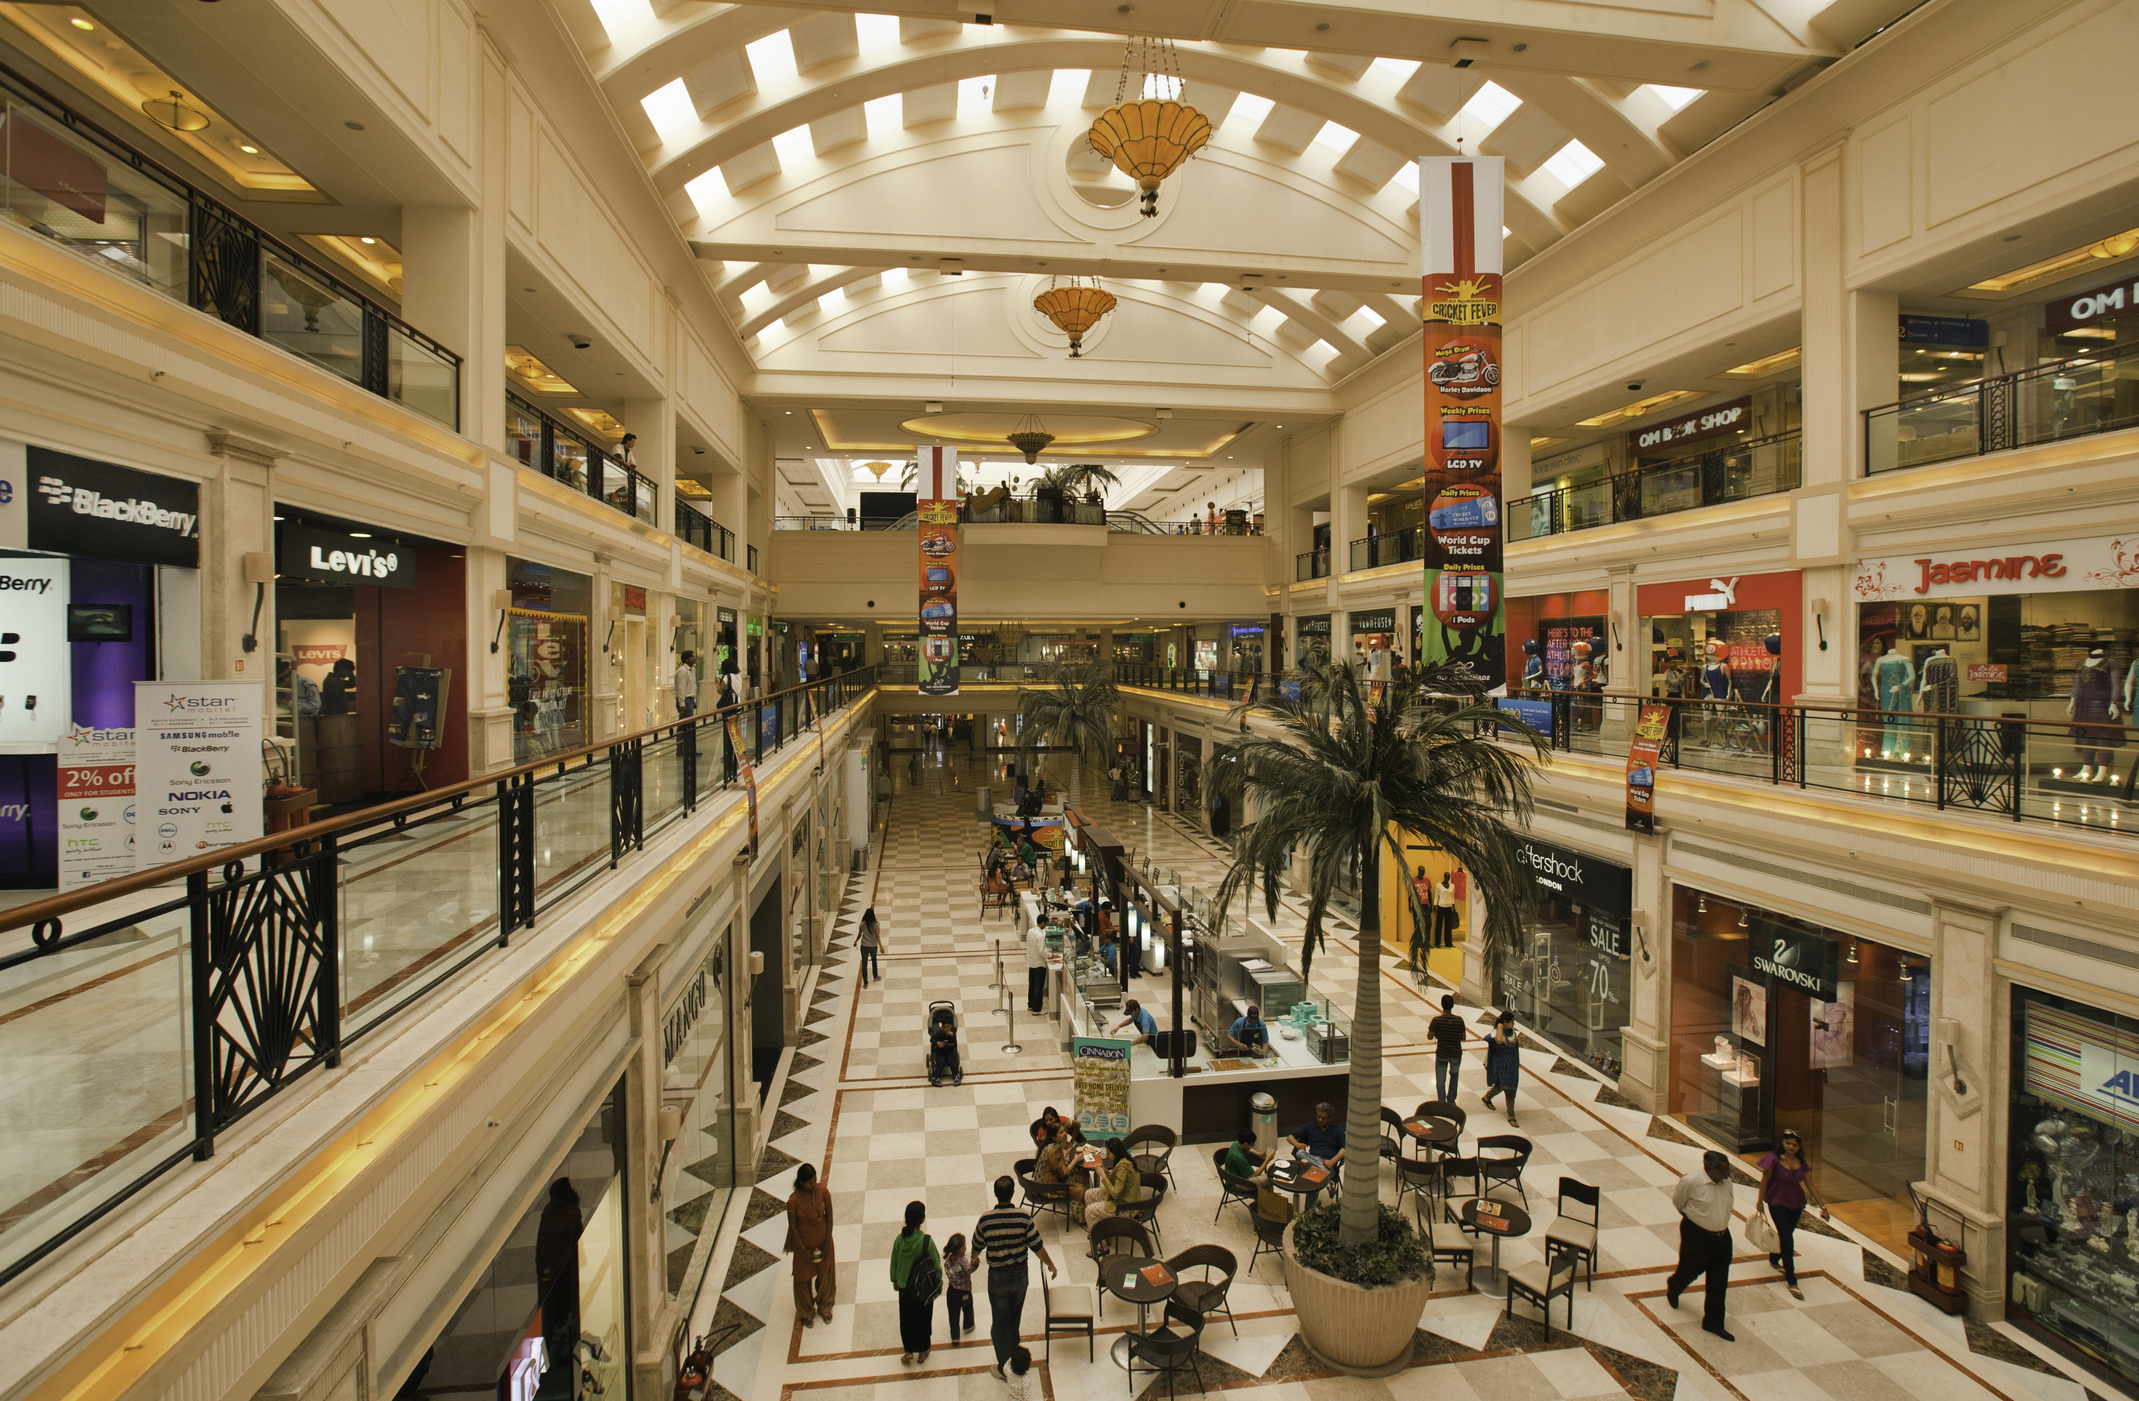 Interior of a multi-level shopping mall with stores on both floors, shoppers, and a central seating area